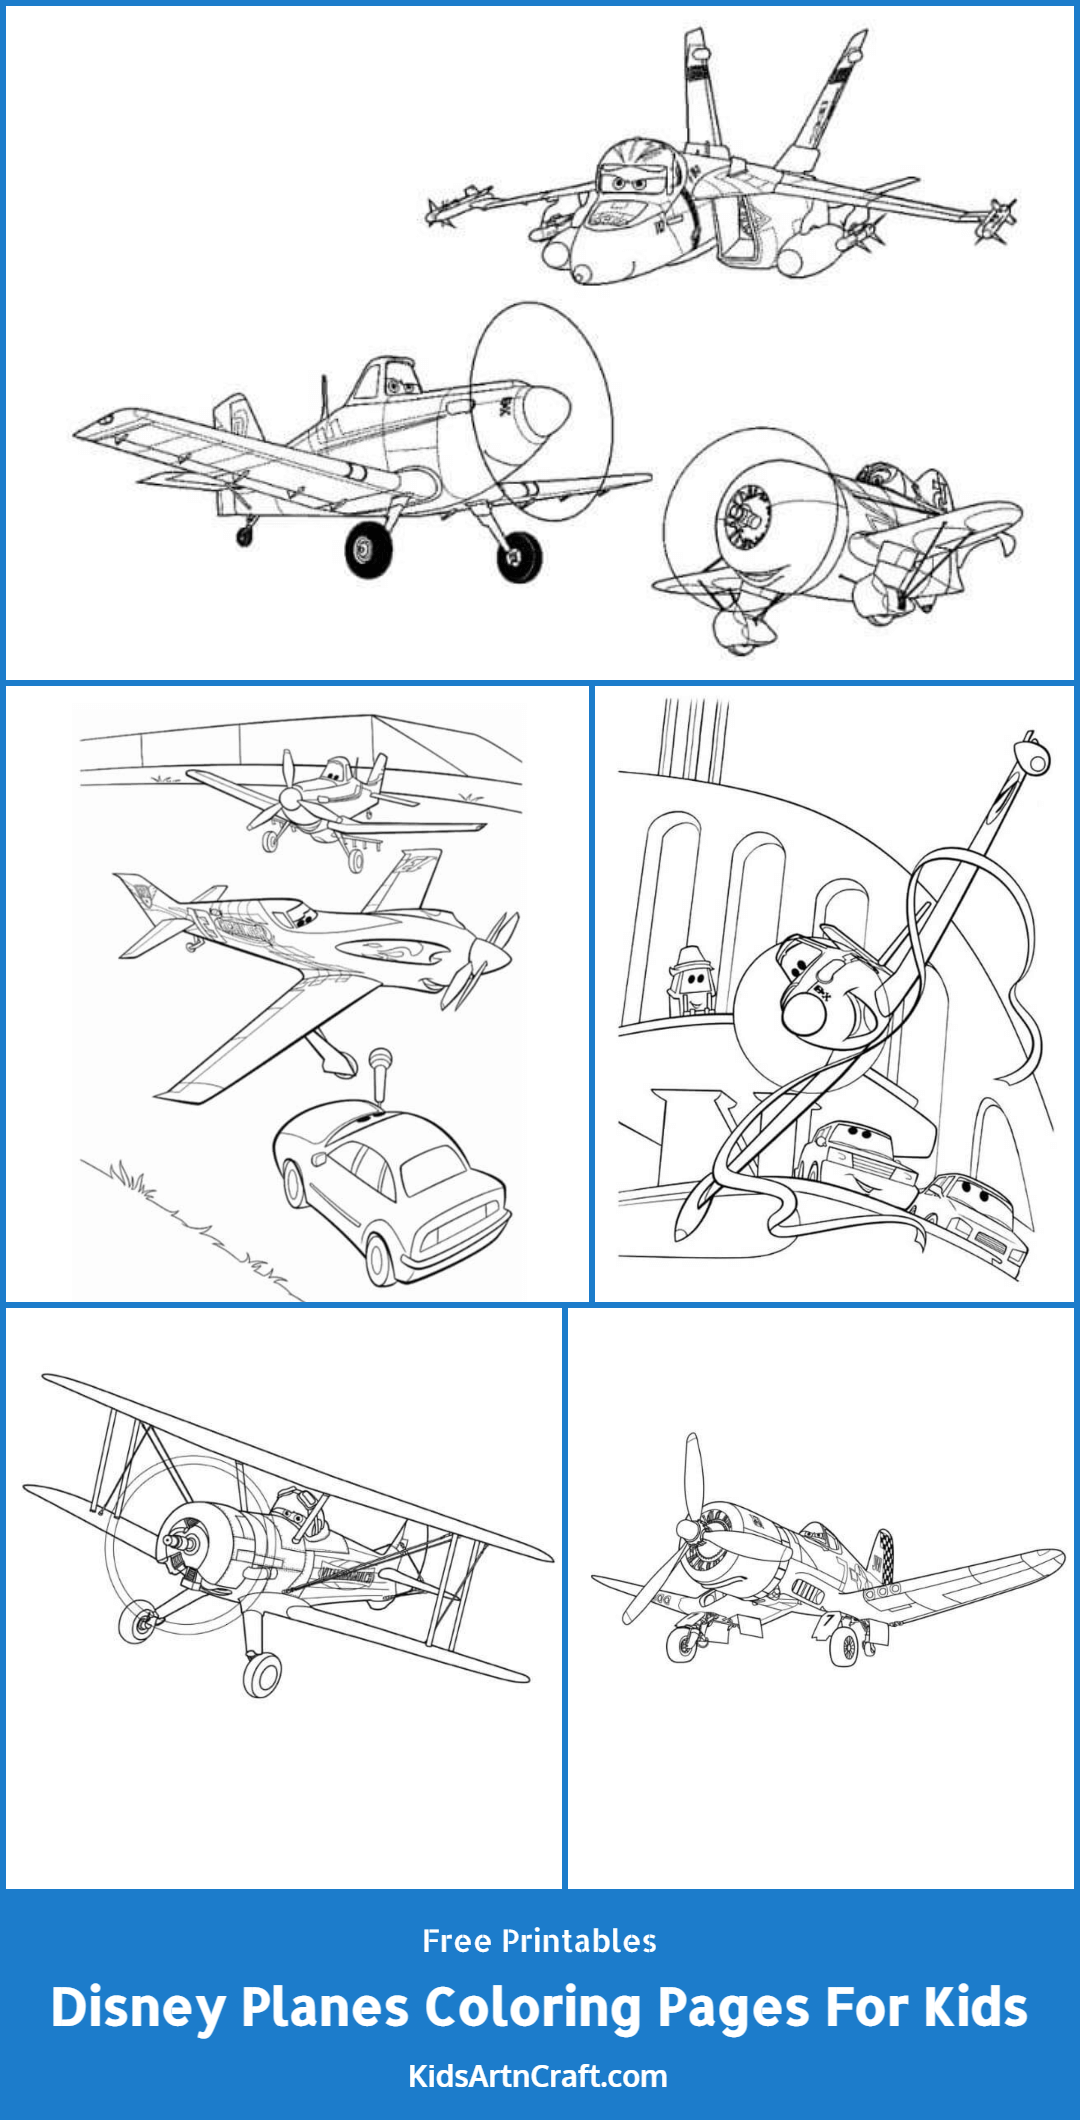 Disney Planes Coloring Pages For Kids – Free Printables